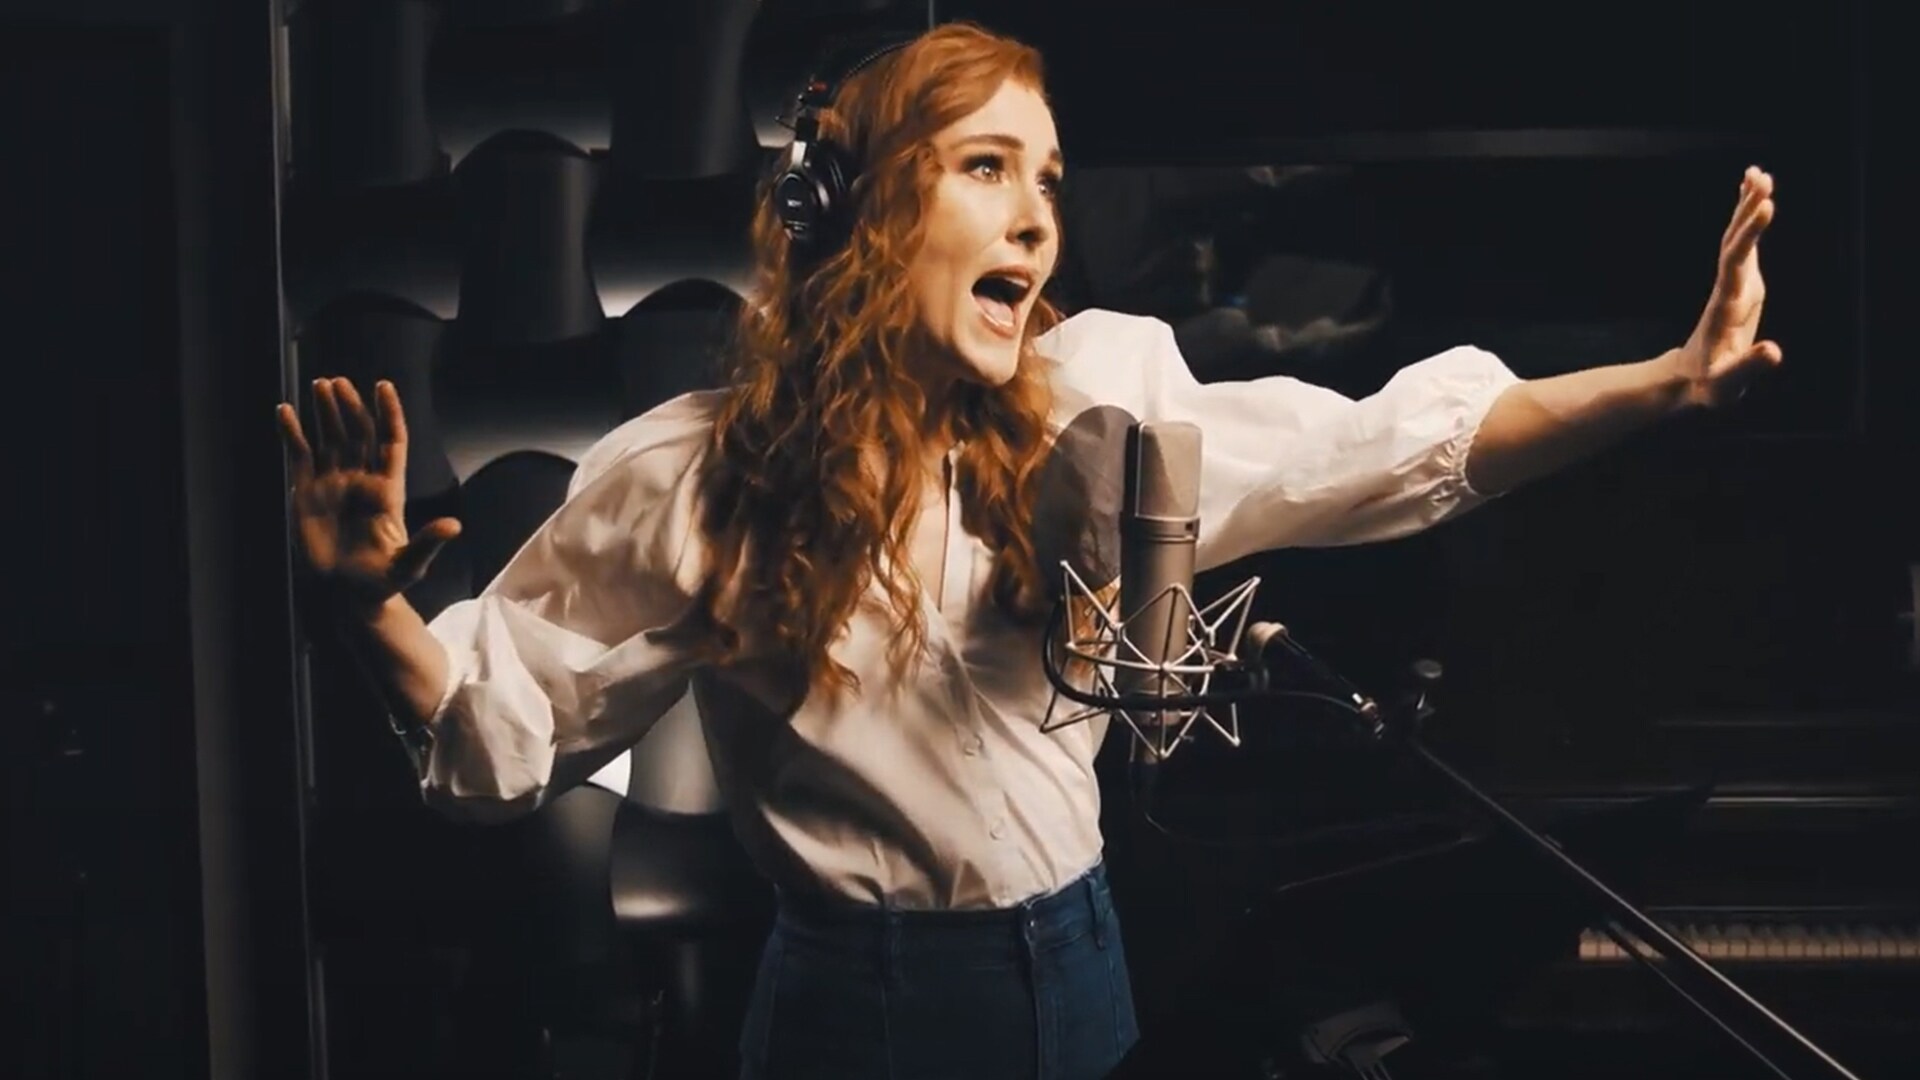 Jemma Rix from the Australian cast of Frozen the Musical performs "Let It Go" in studio